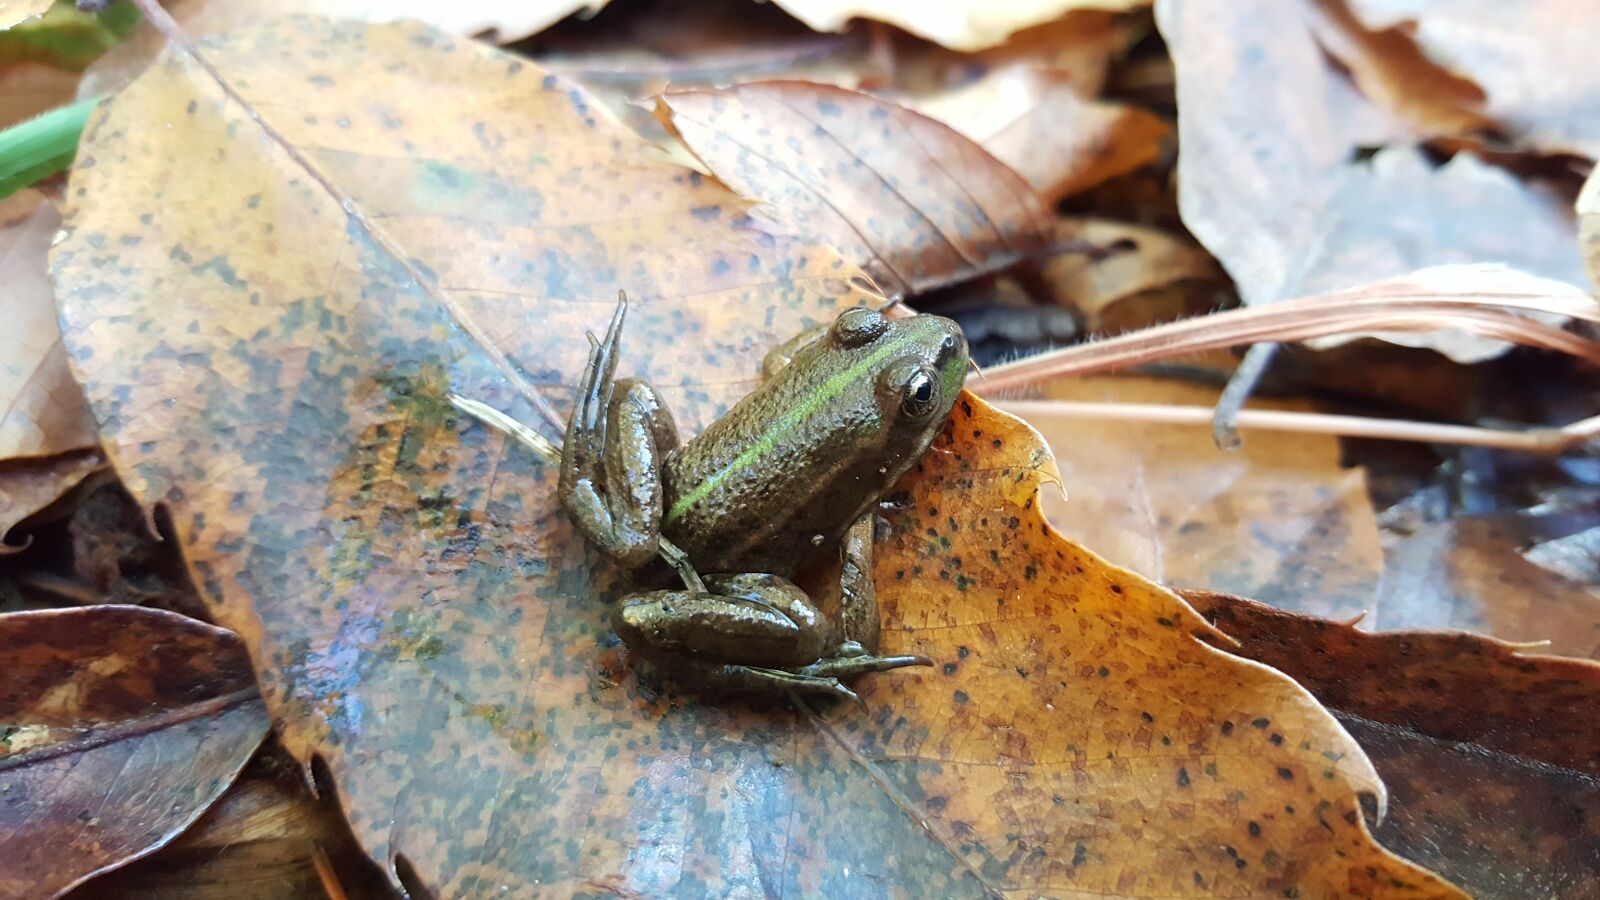 Samsung Galaxy S6 sample photo. Frog, nature, forest photography